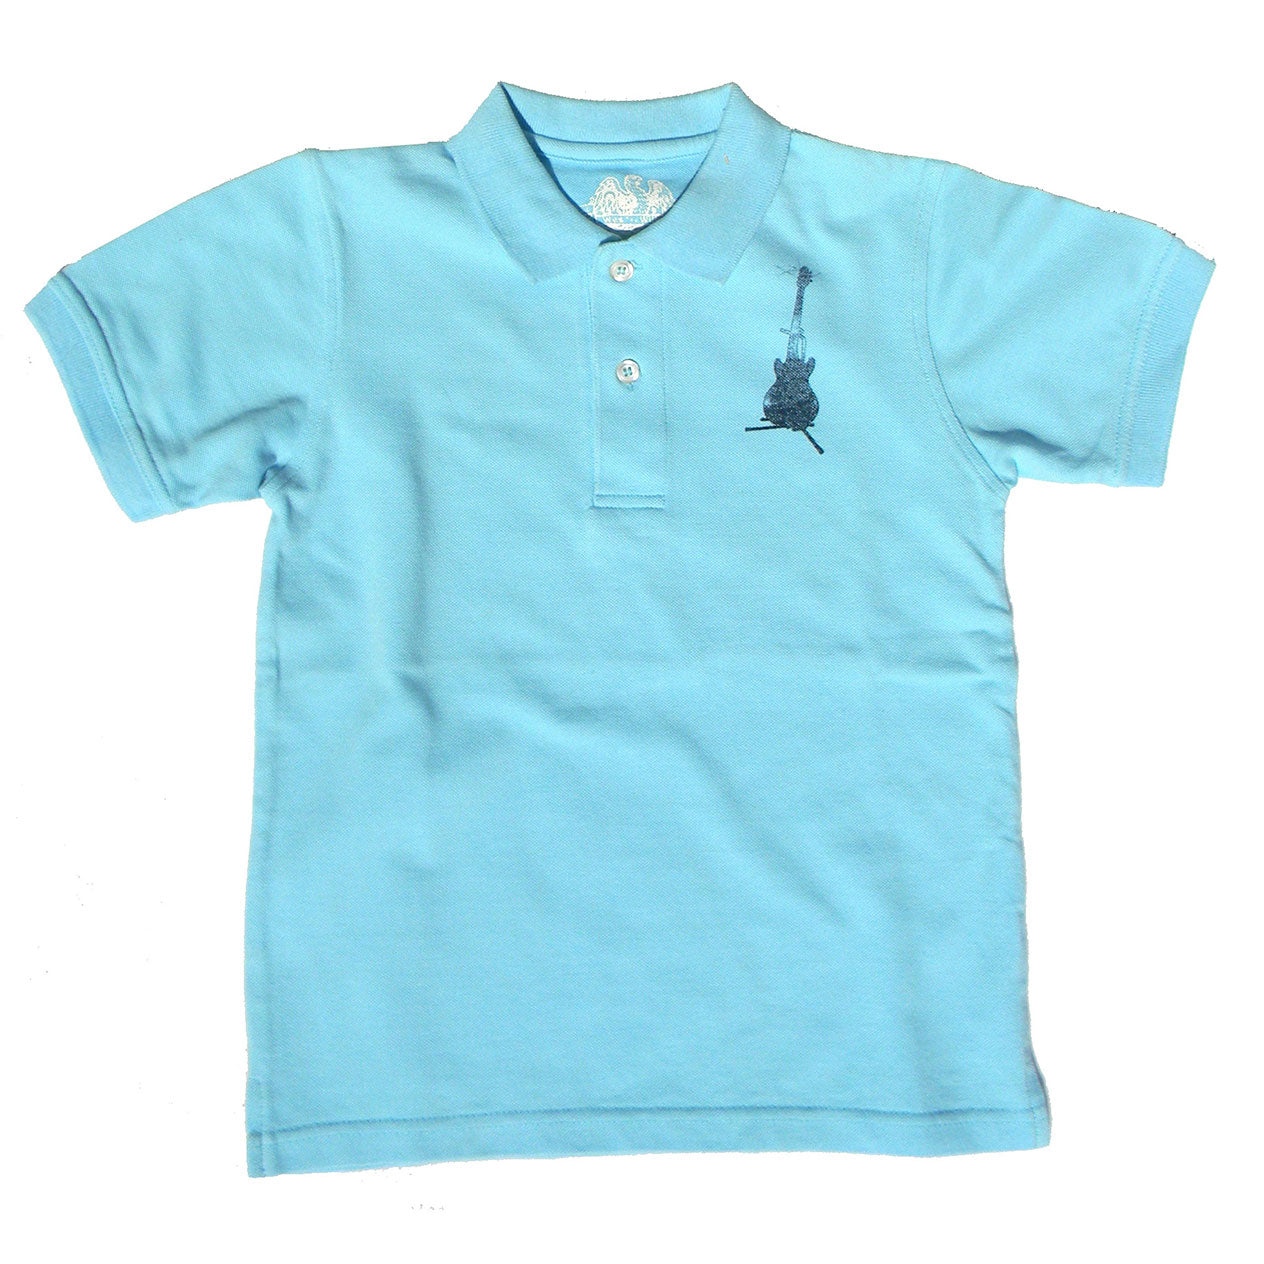 Boys Pique Polo with Guitar Print by Wes and Willy